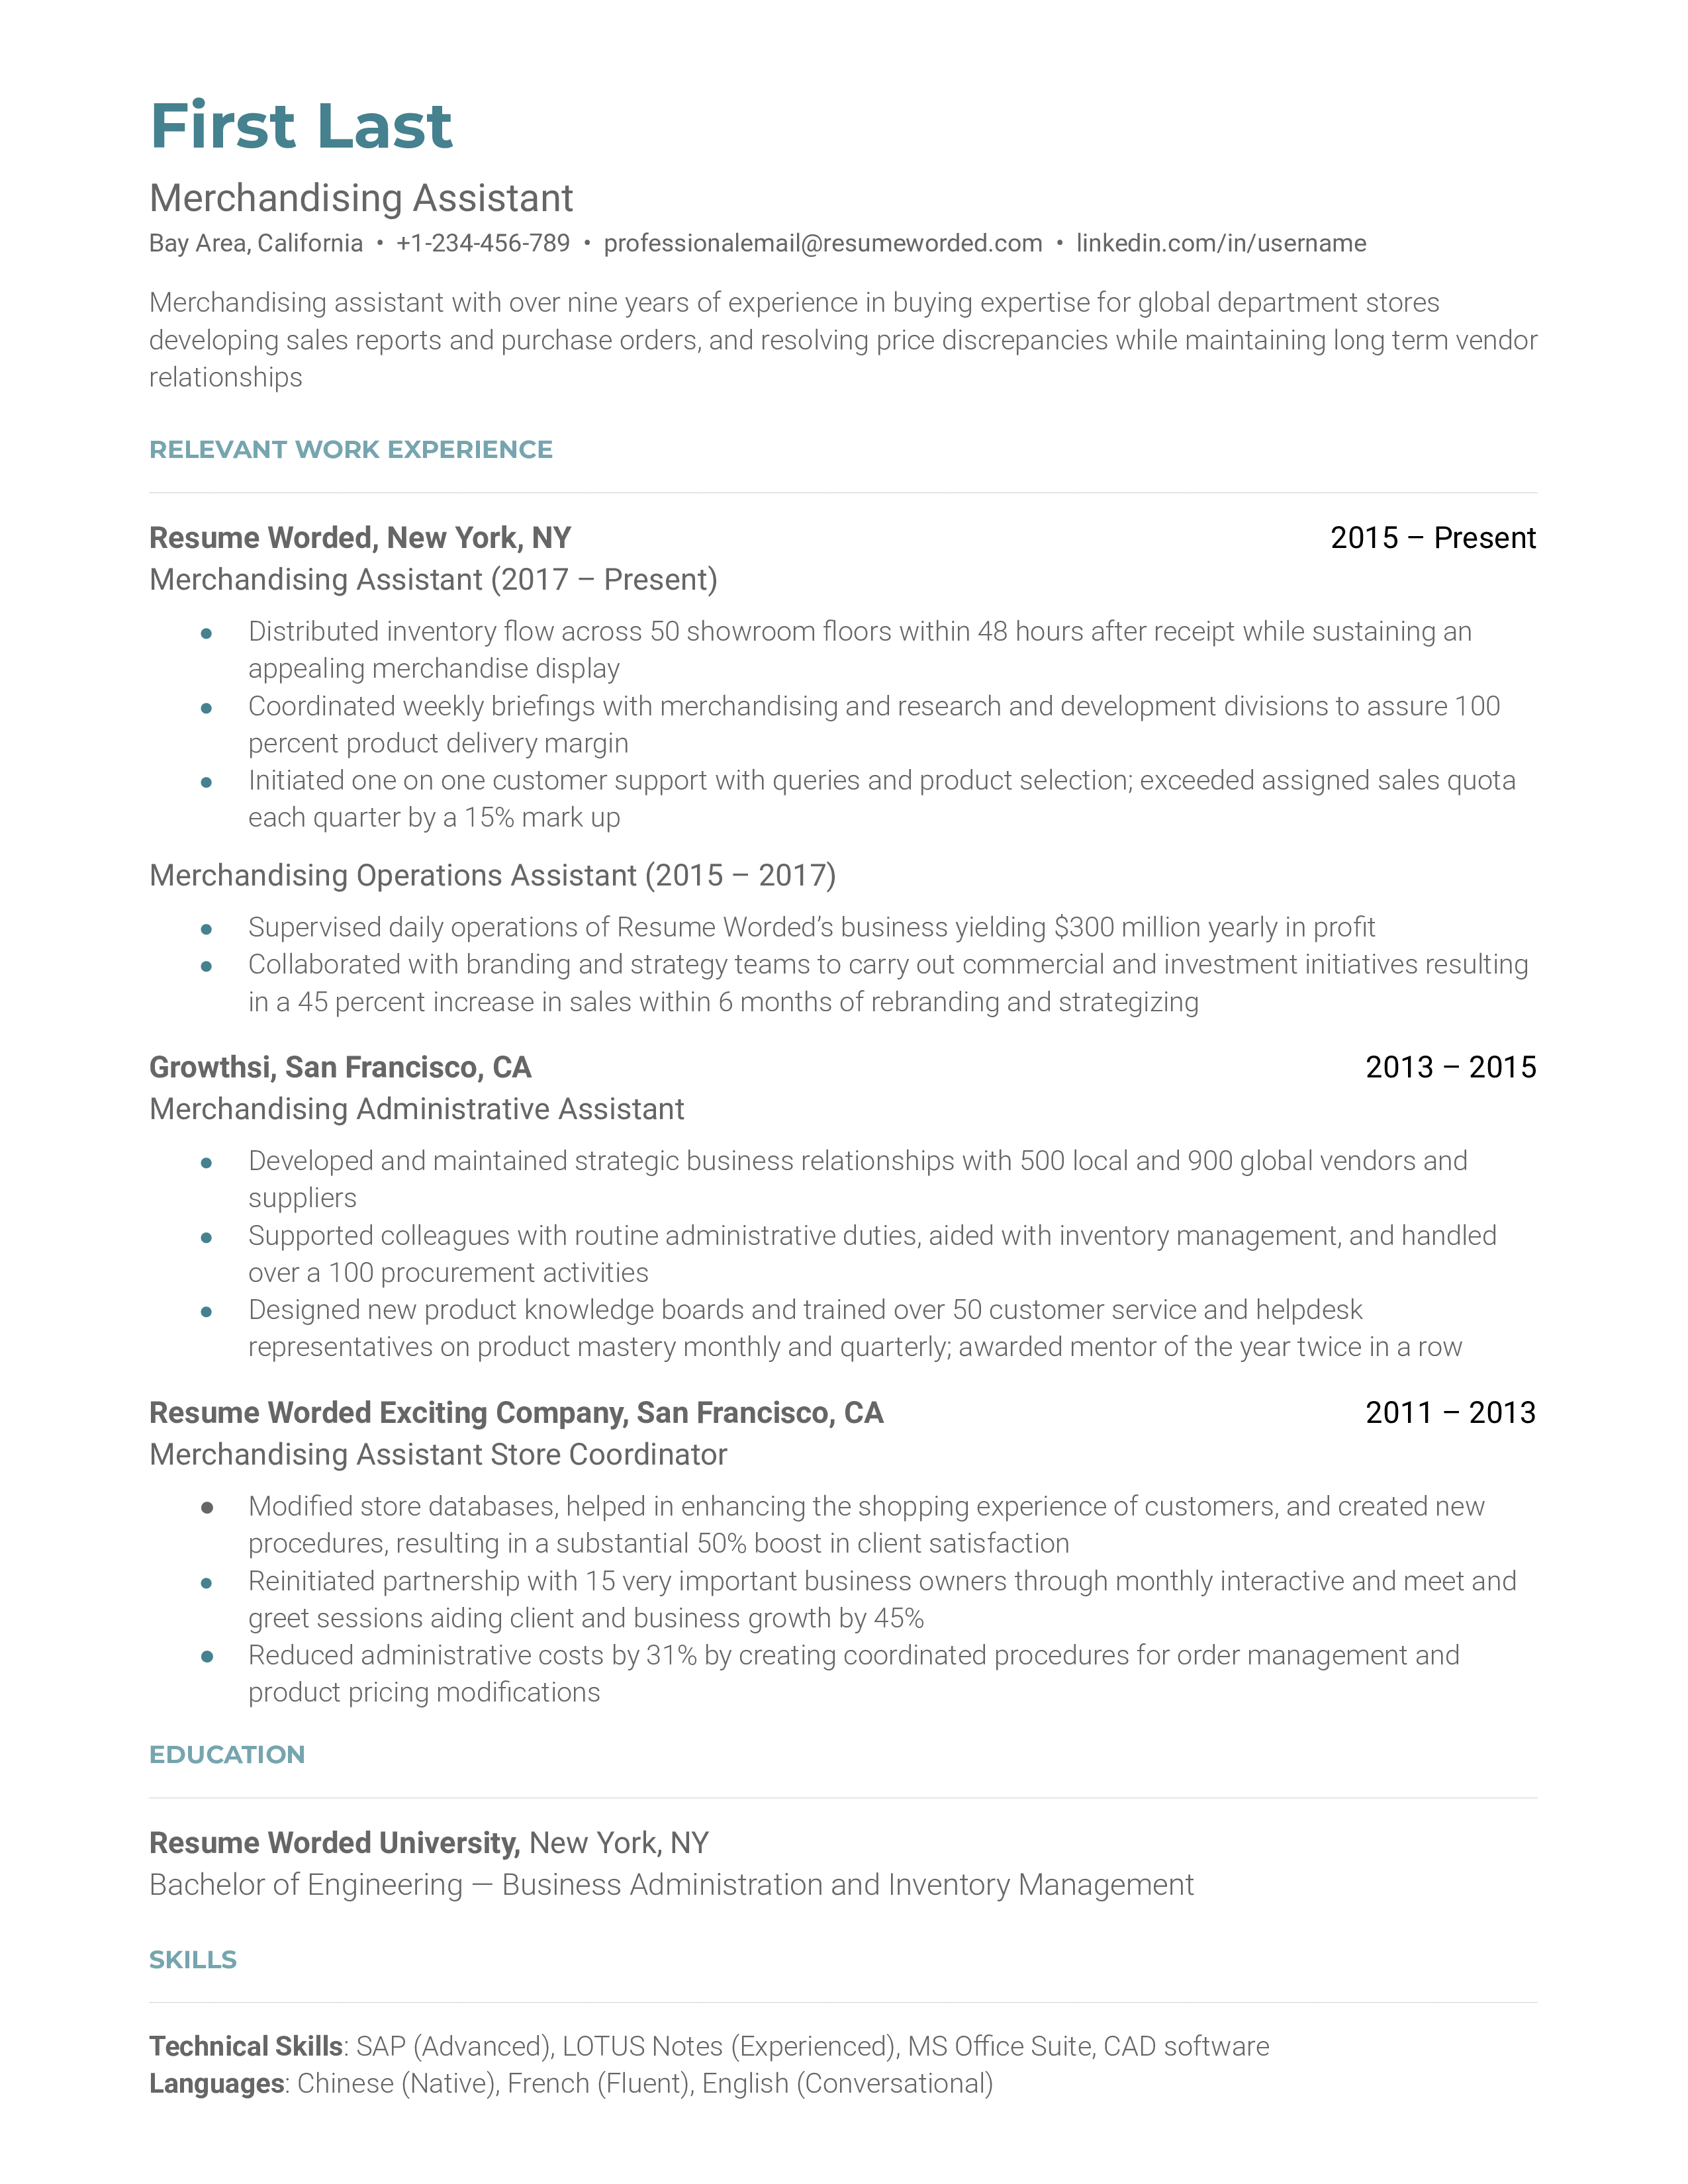 A merchandising assistant resume example that includes contact info and a brief description